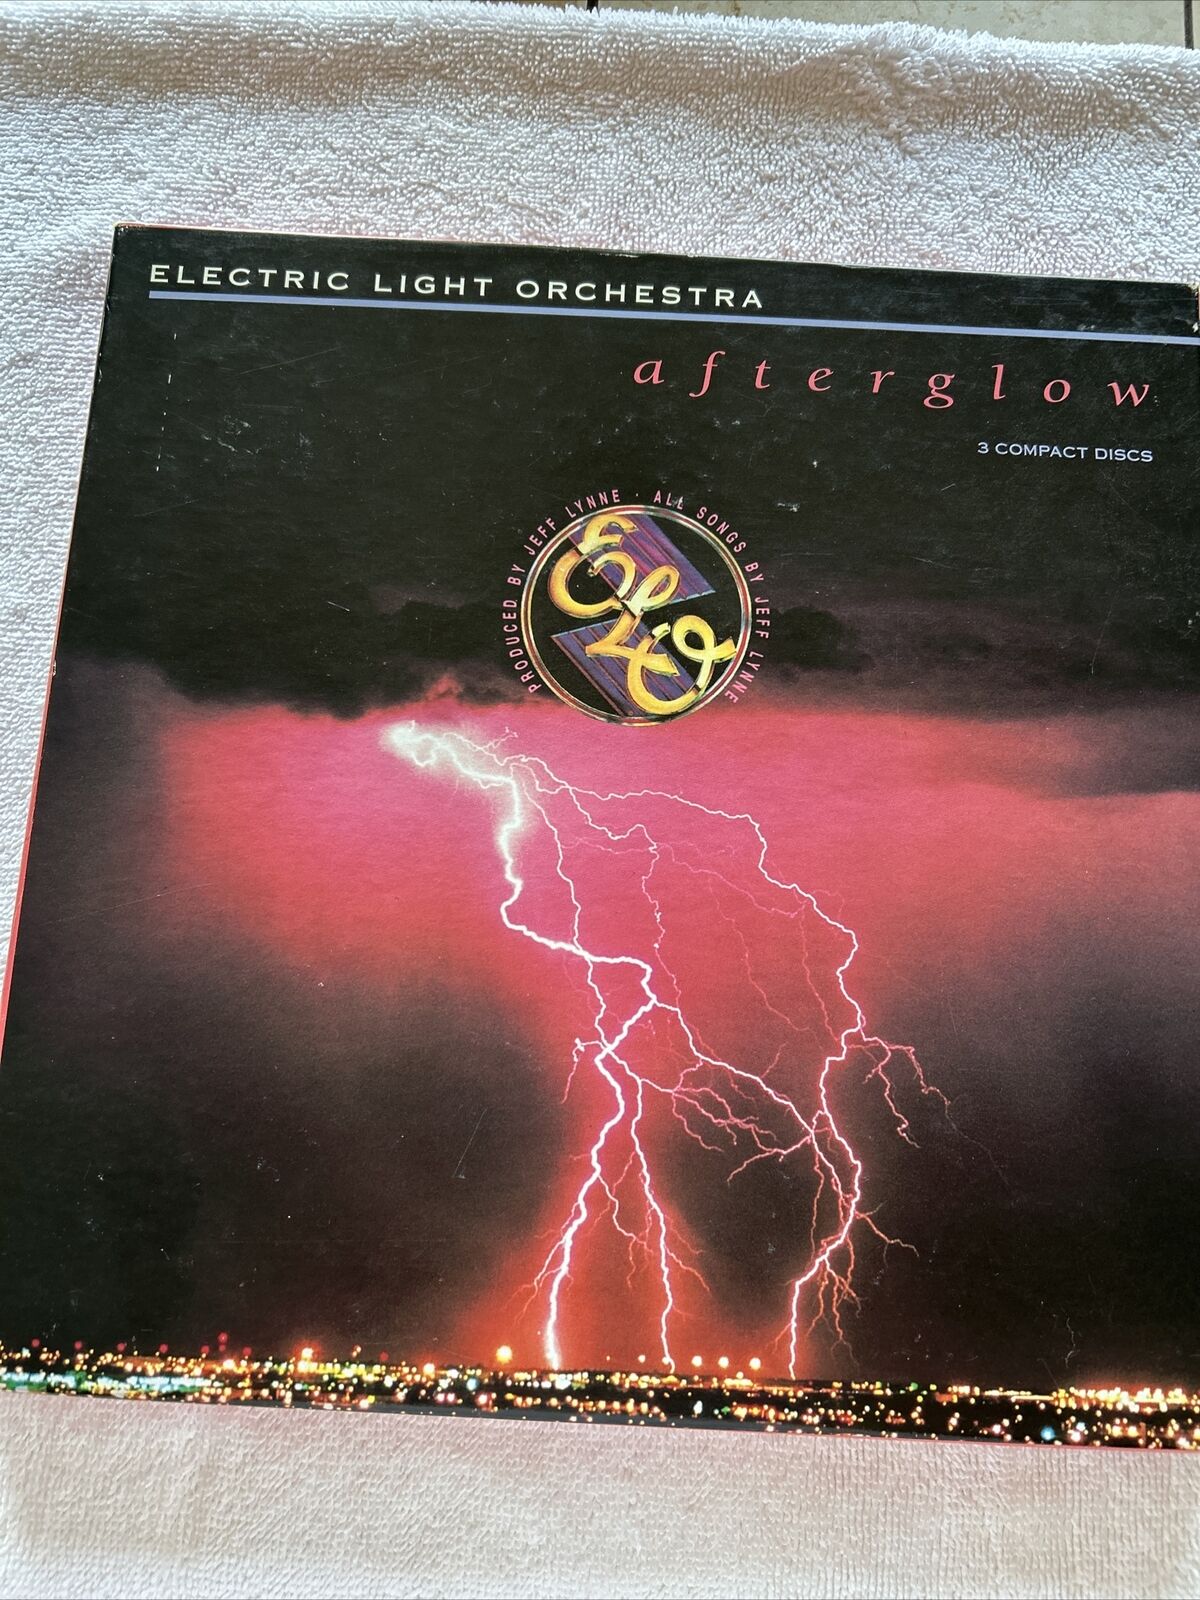 ELECTRIC LIGHT ORCHESTRA - afterglow 3 cd box set (gently used)